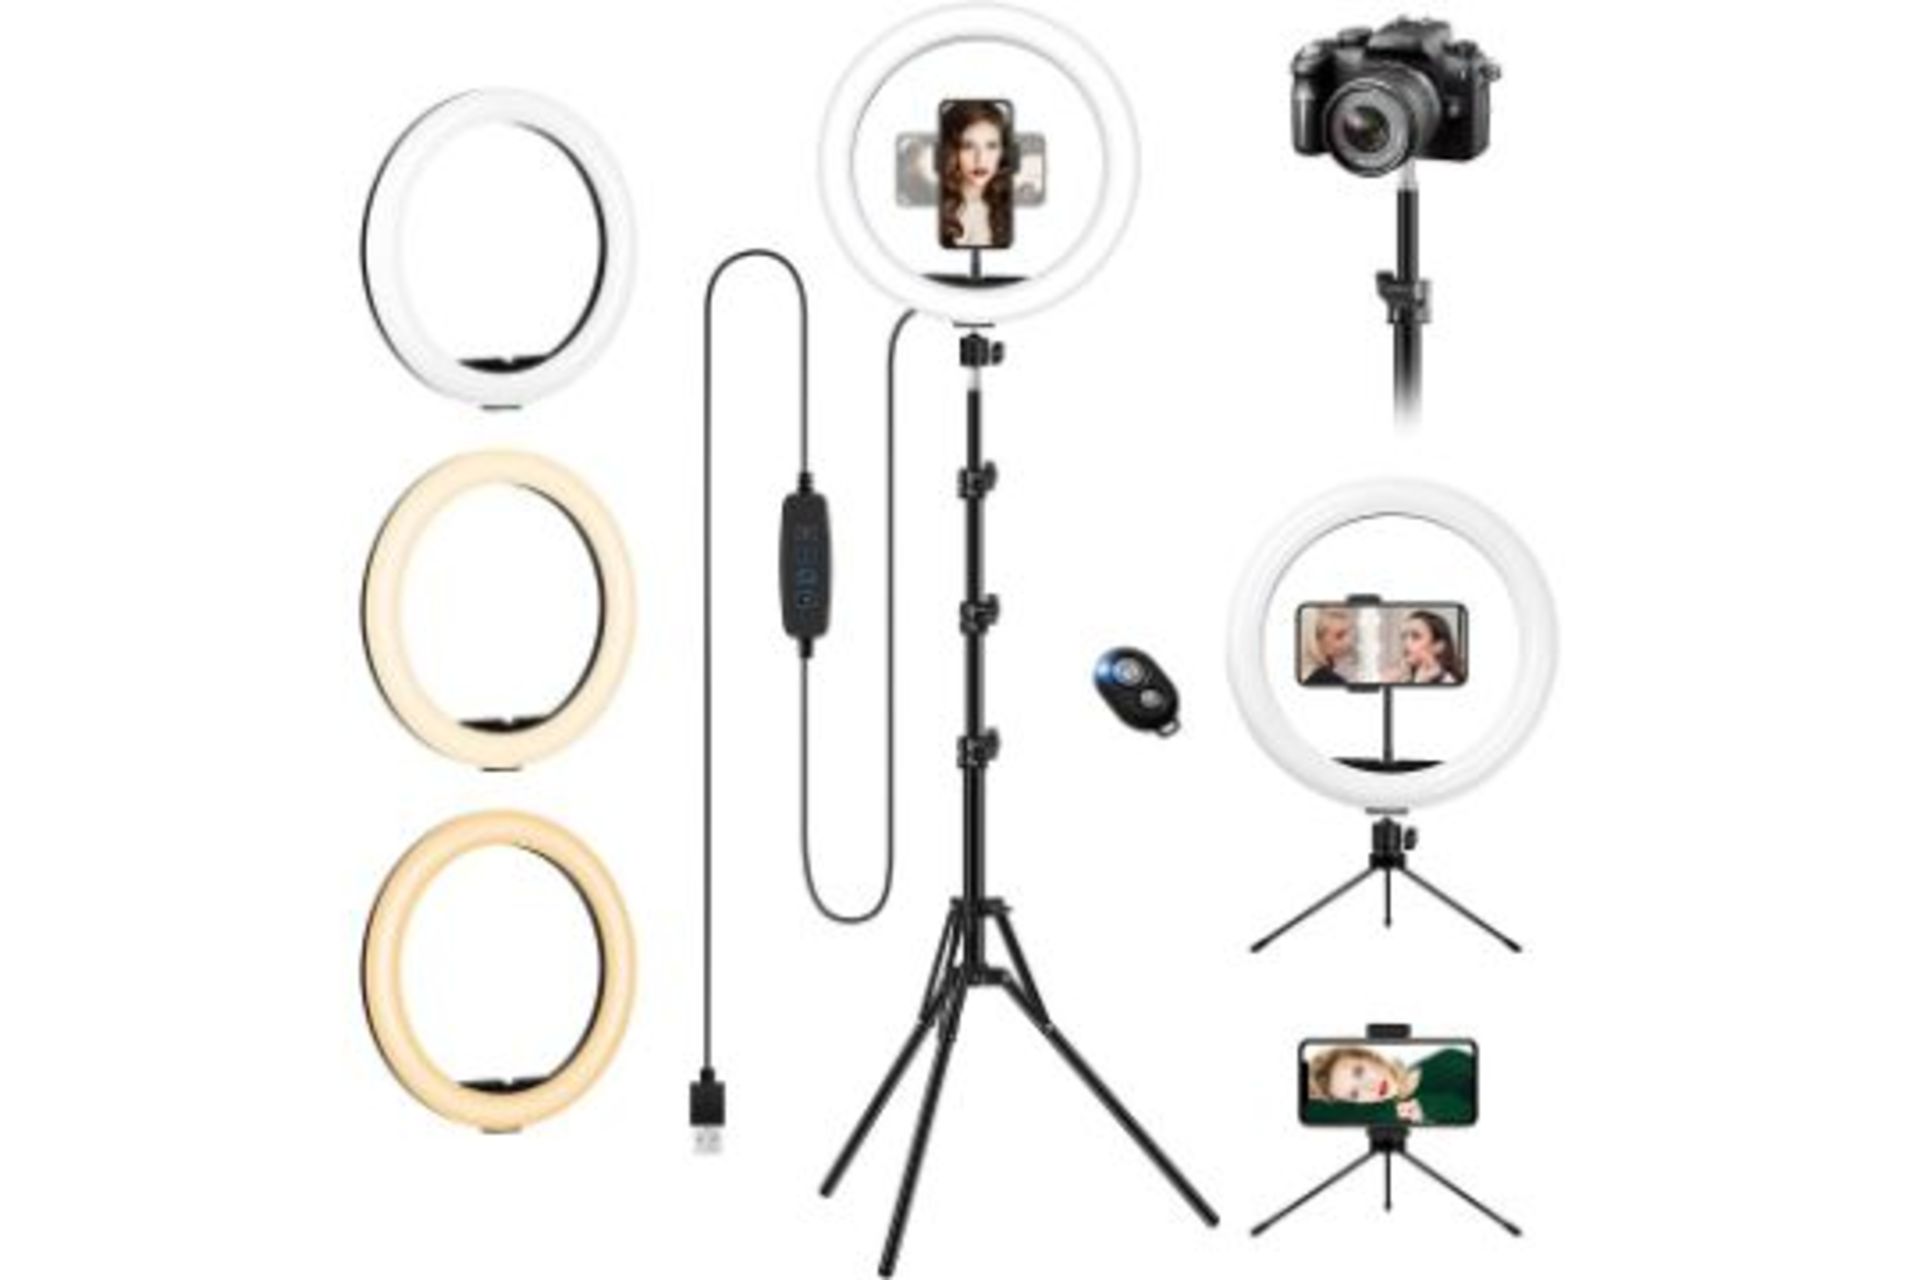 12 X BRAND NEW PROFESSIONAL RING LIGHTS WITH STAND FOR MEETINGS, VIDEO SHOOTING ETC R15